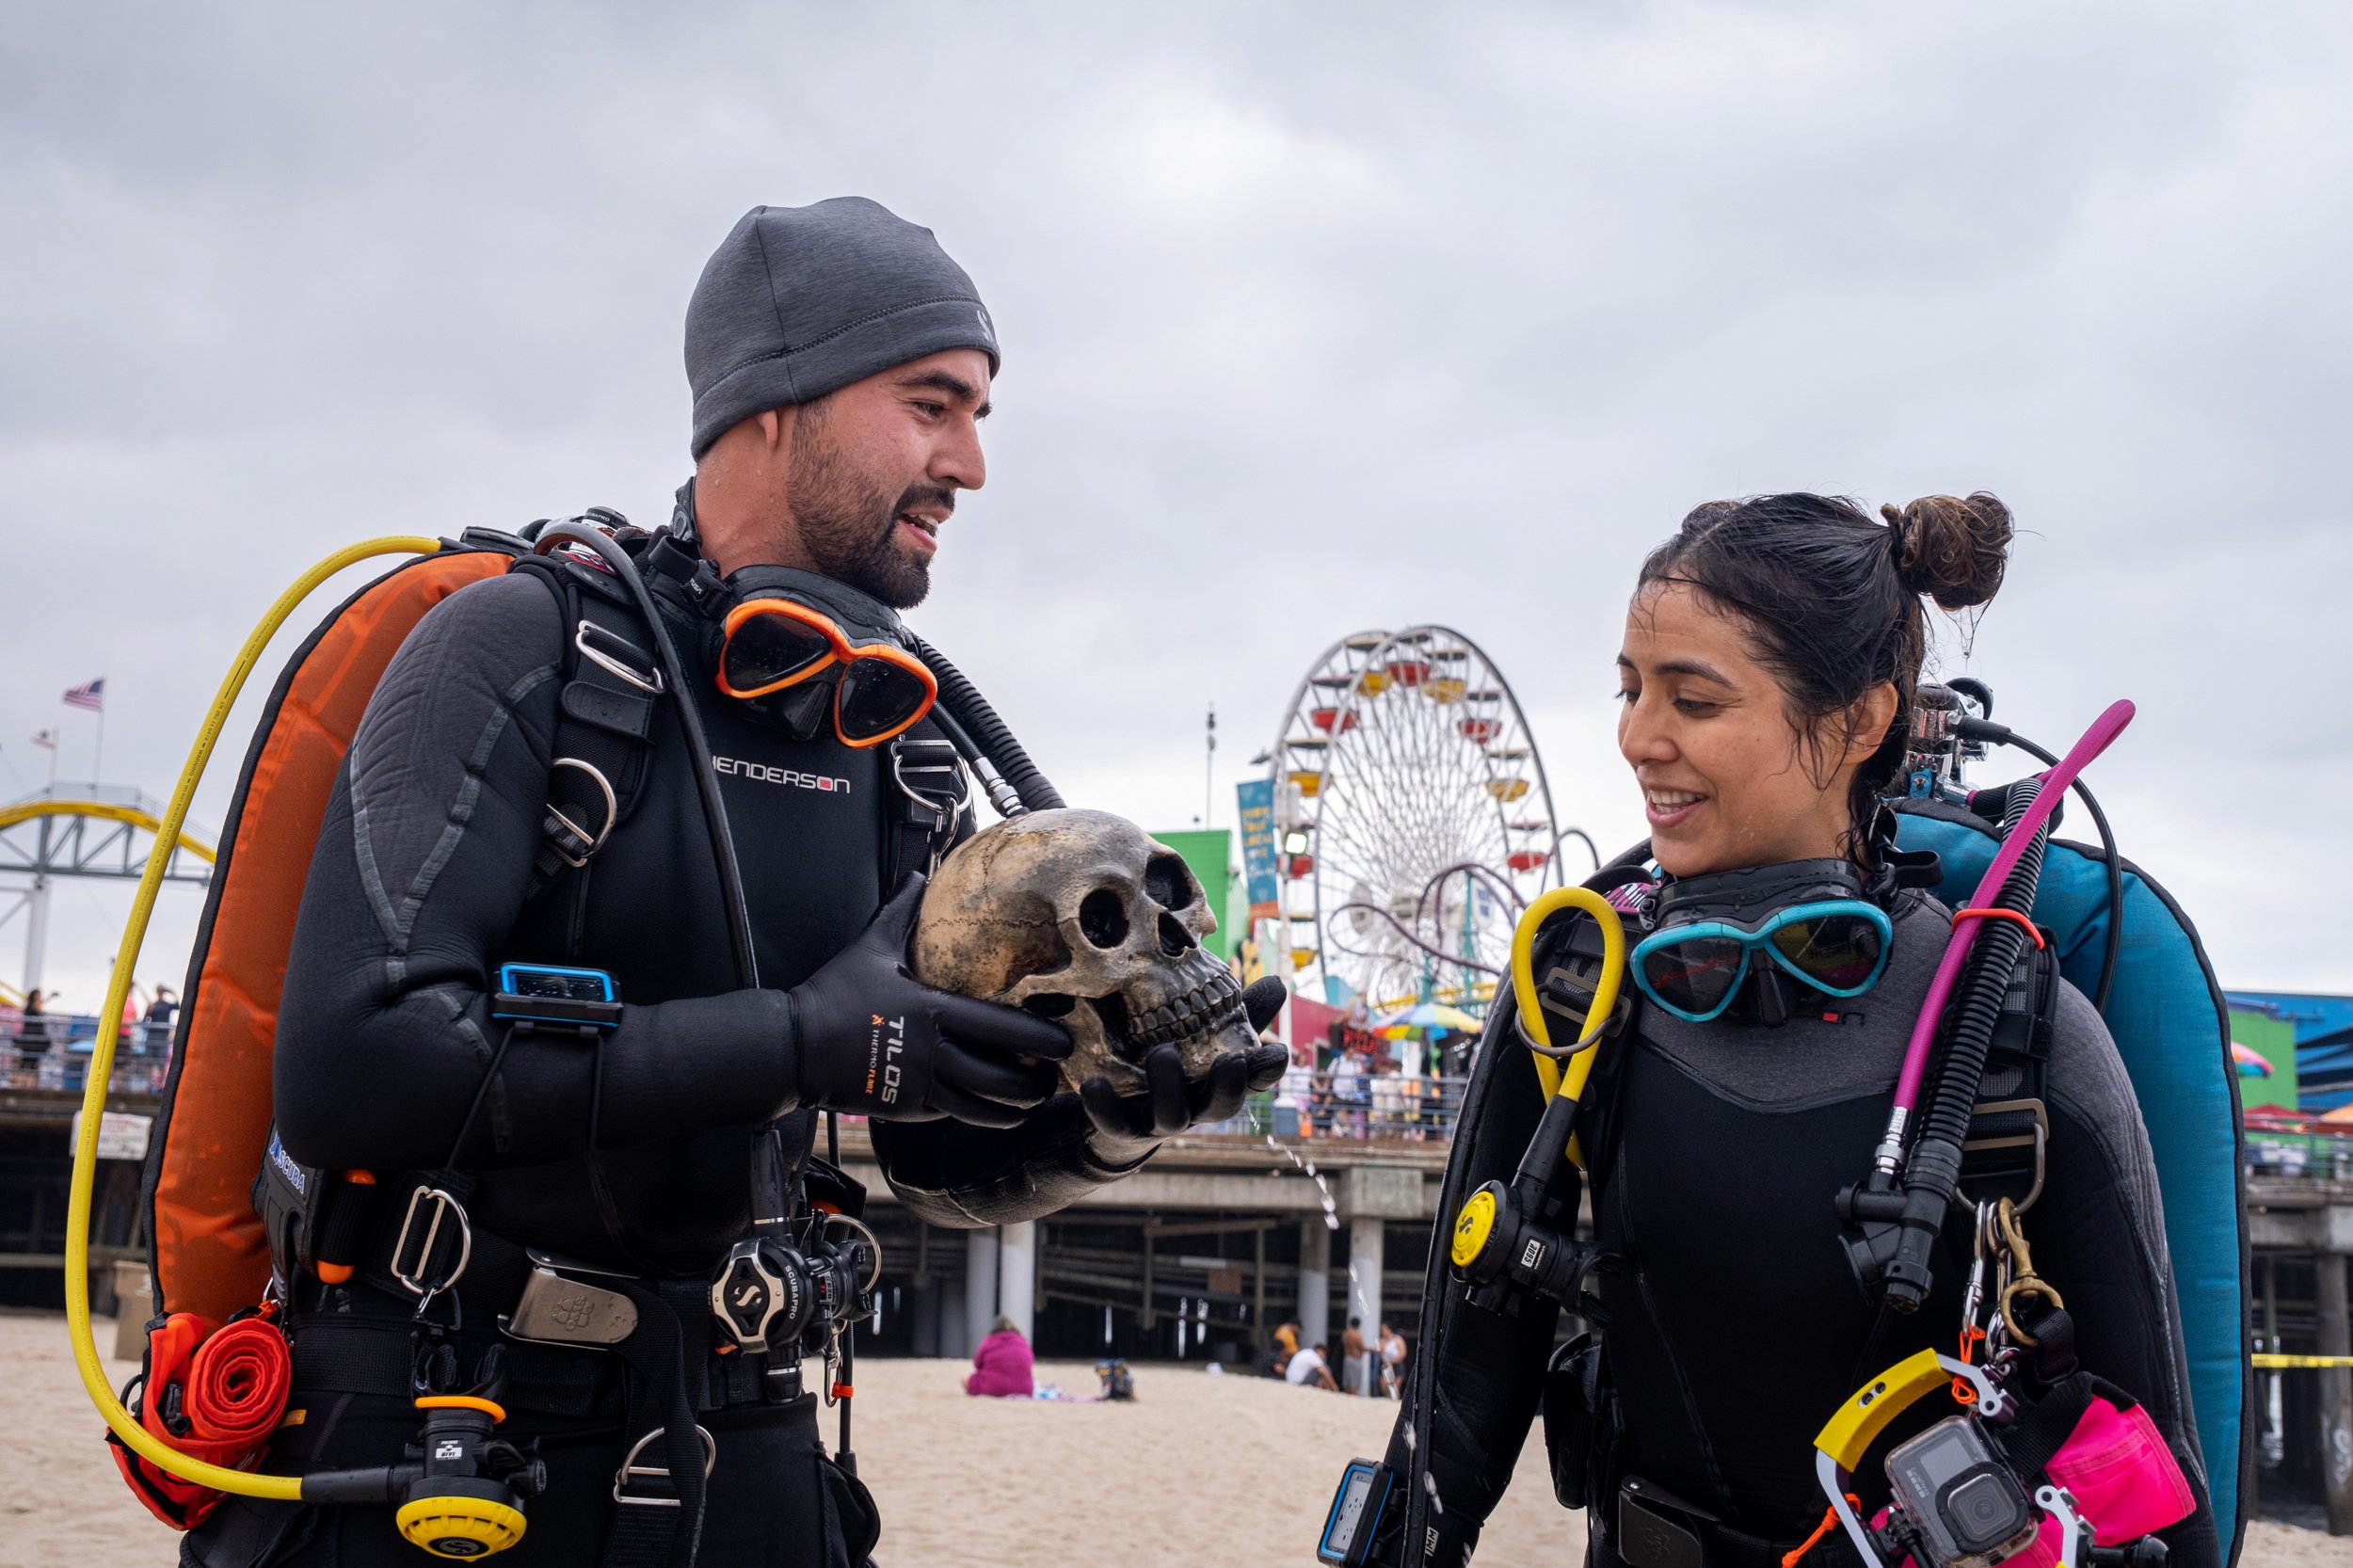  Alvin and Alma Alvarez, (L to R) members of Eco Dive Center, hold a skull that they collected on their dive below the water surrounding the Santa Monica Pier. Coastal Cleanup Day, led by Heal The Bay in Santa Monica Calif. on Saturday, September 17,